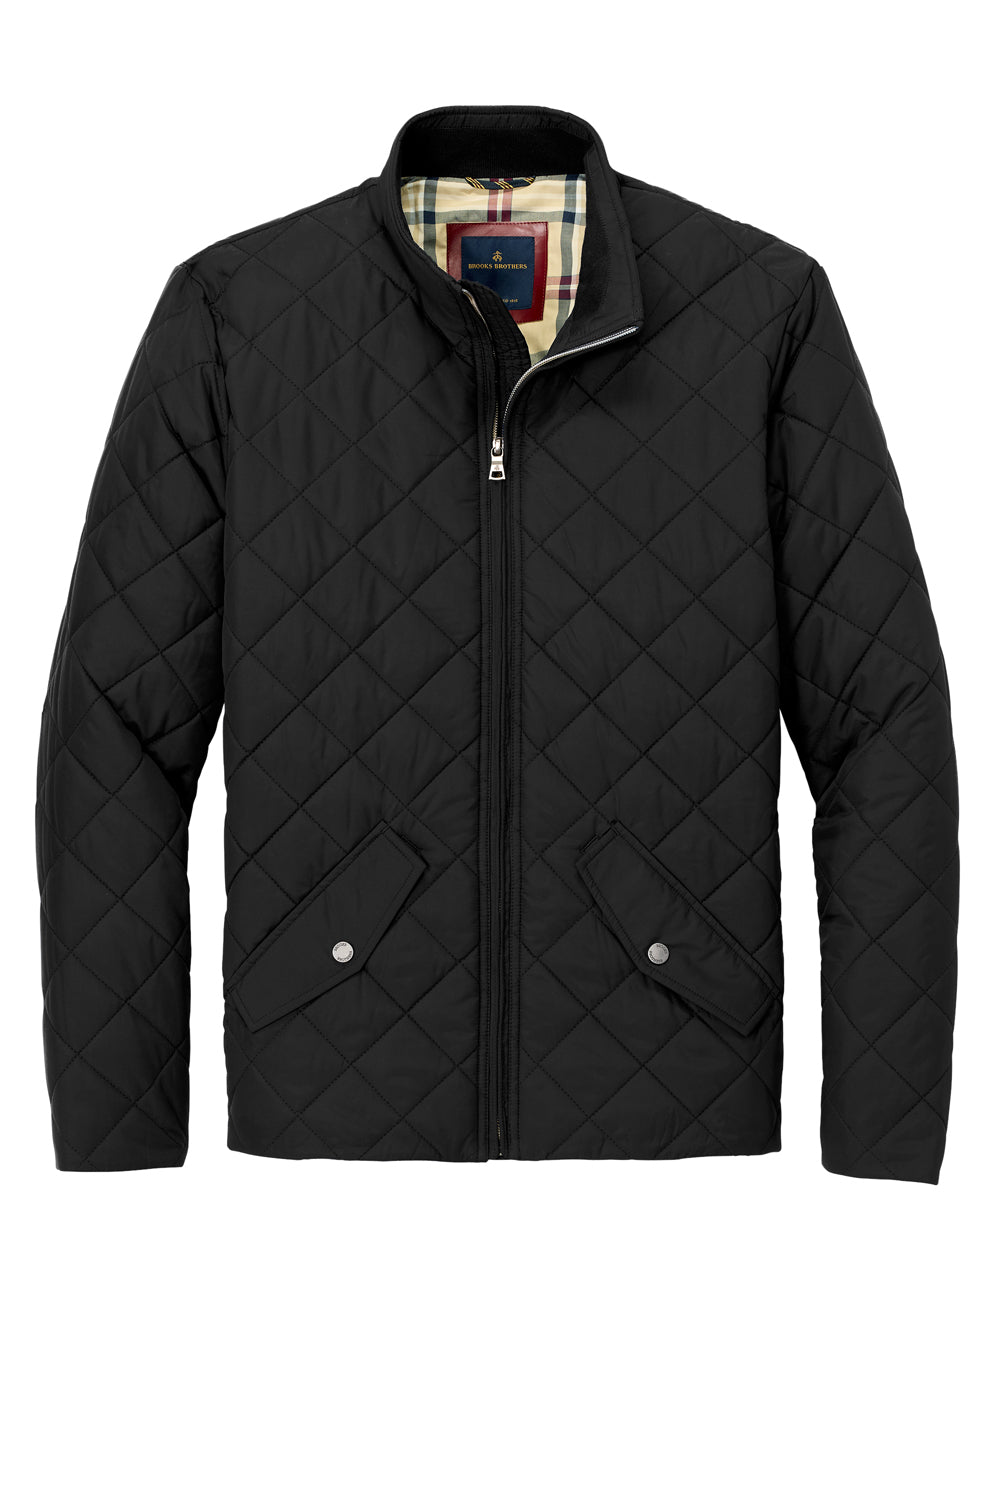 Brooks Brothers Mens Water Resistant Quilted Full Zip Jacket Deep Black Flat Front